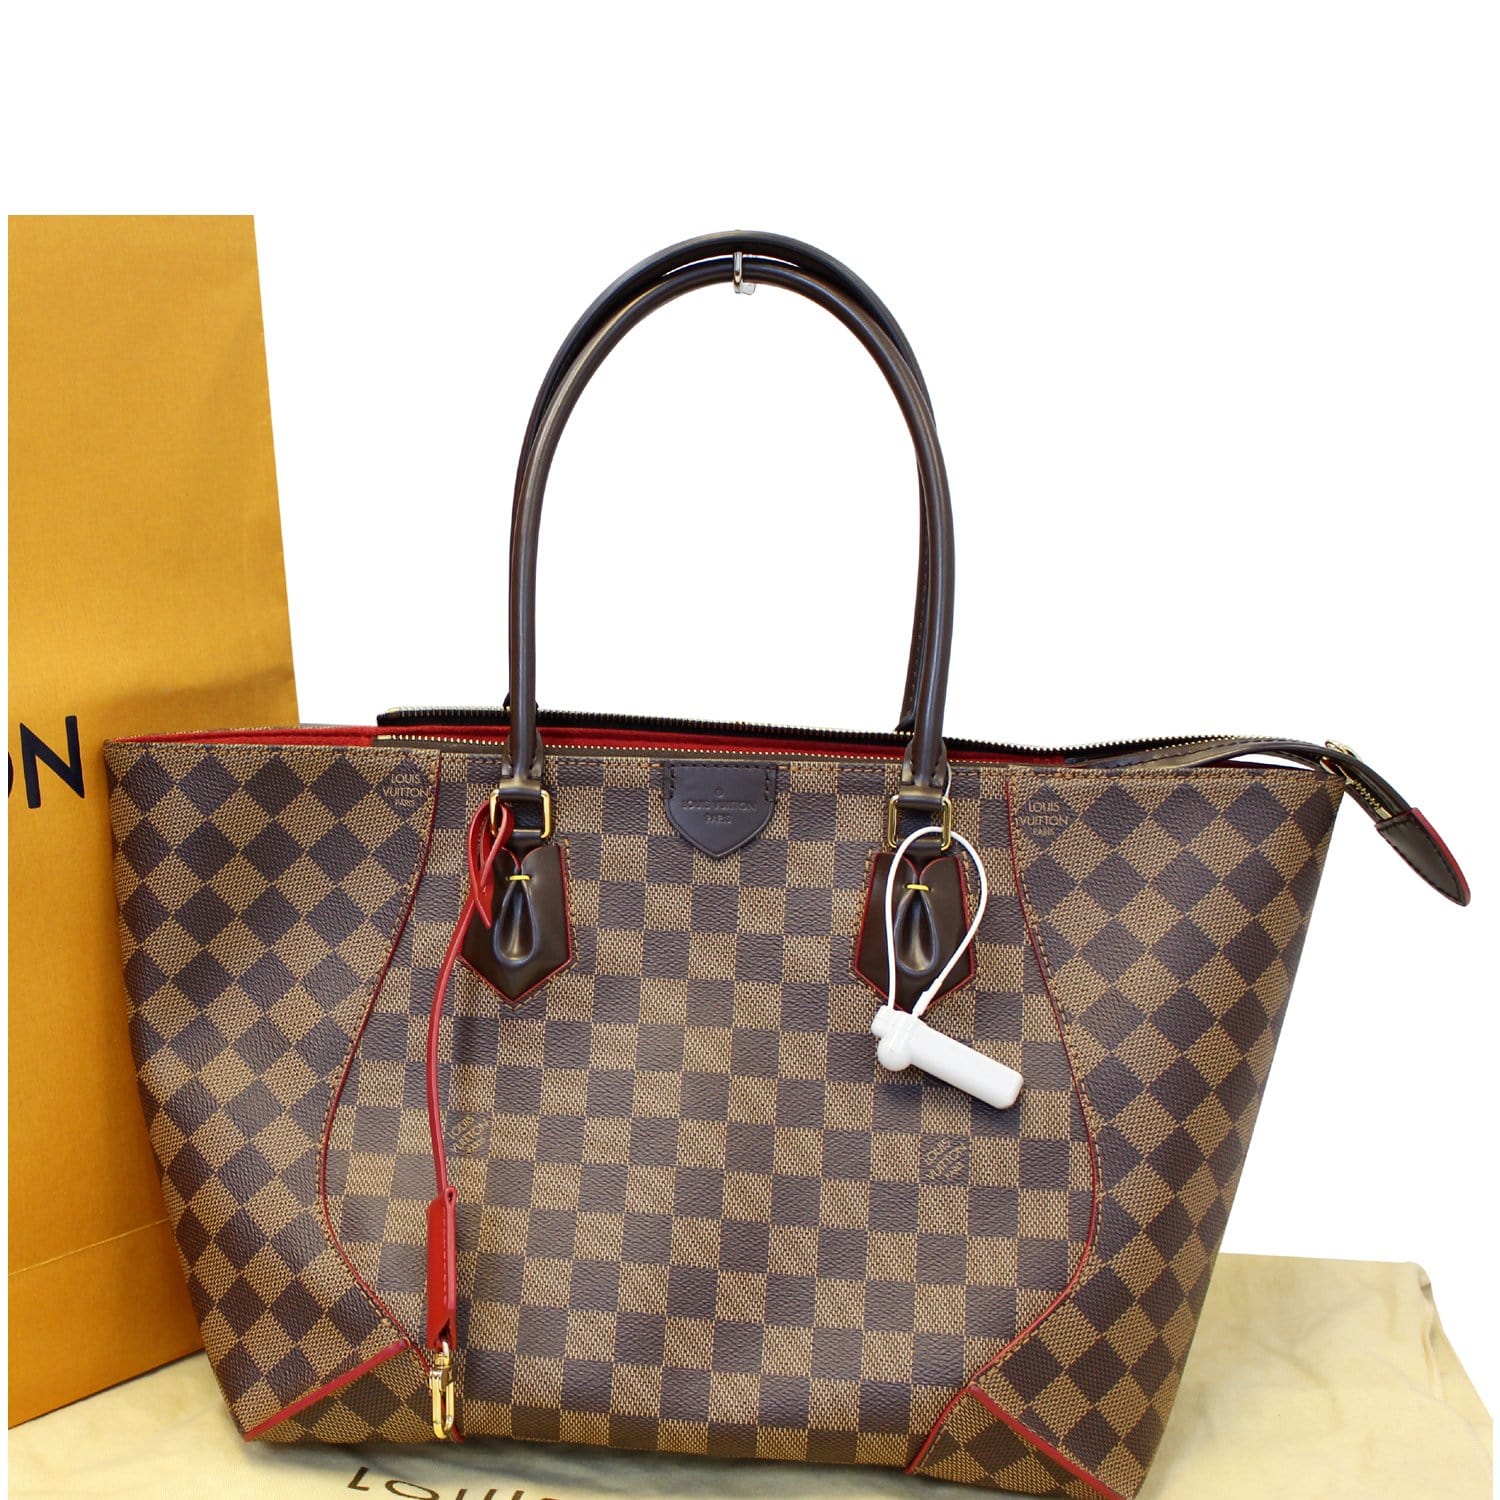 Caissa MM Tote Bag DAMIER EBENE EXCELLENT NEW CONDITION 100